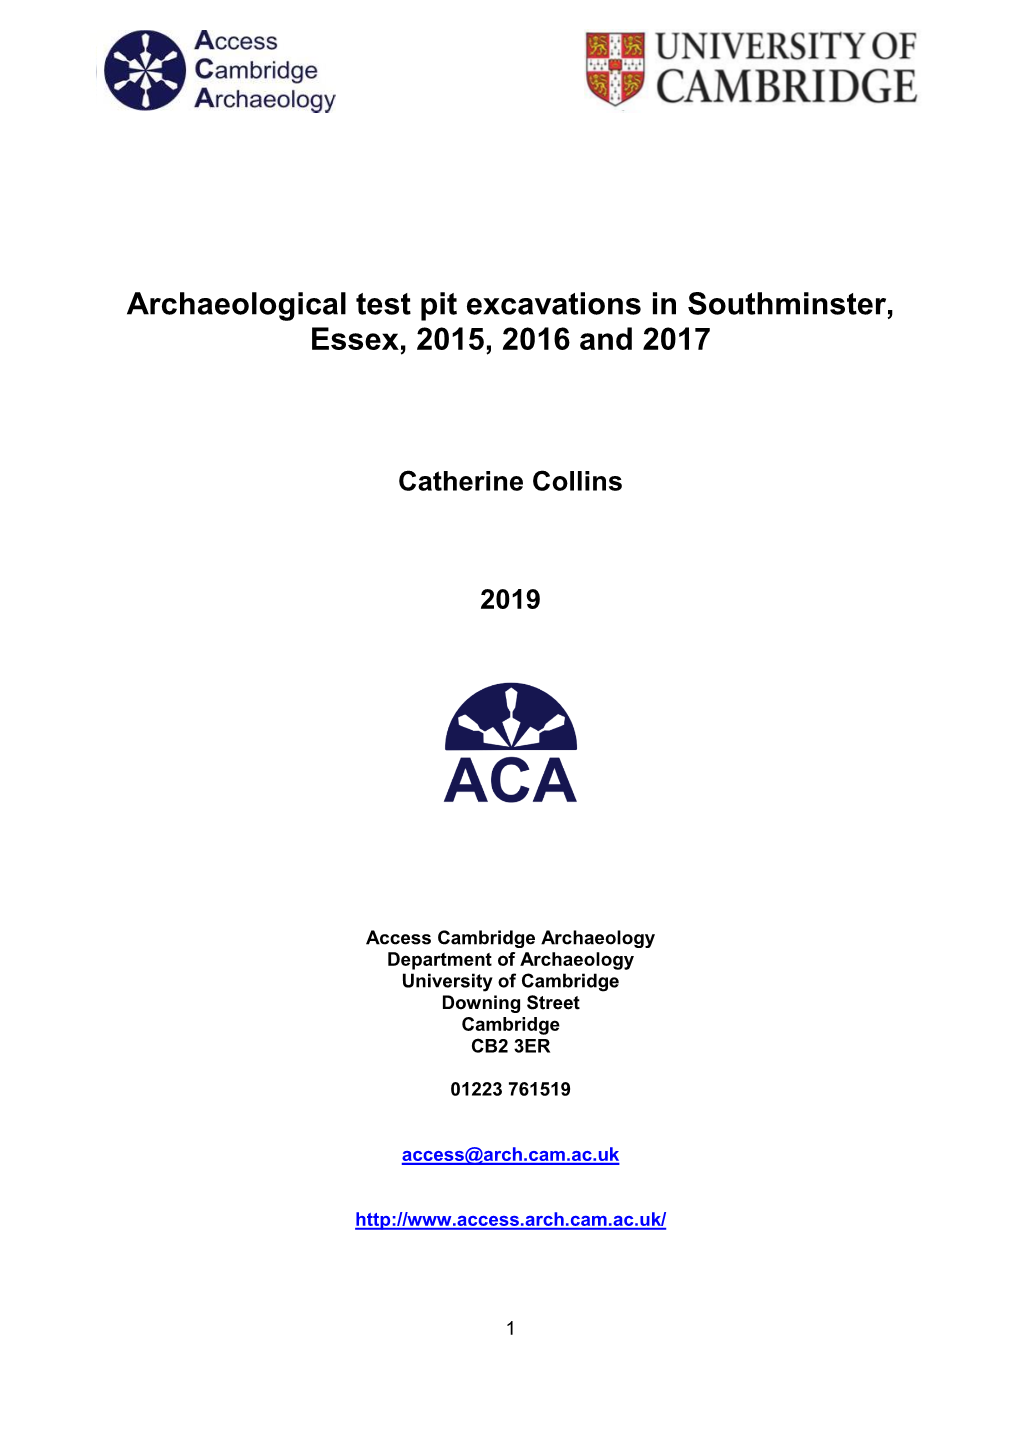 Archaeological Test Pit Excavations in Southminster, Essex, 2015, 2016 and 2017